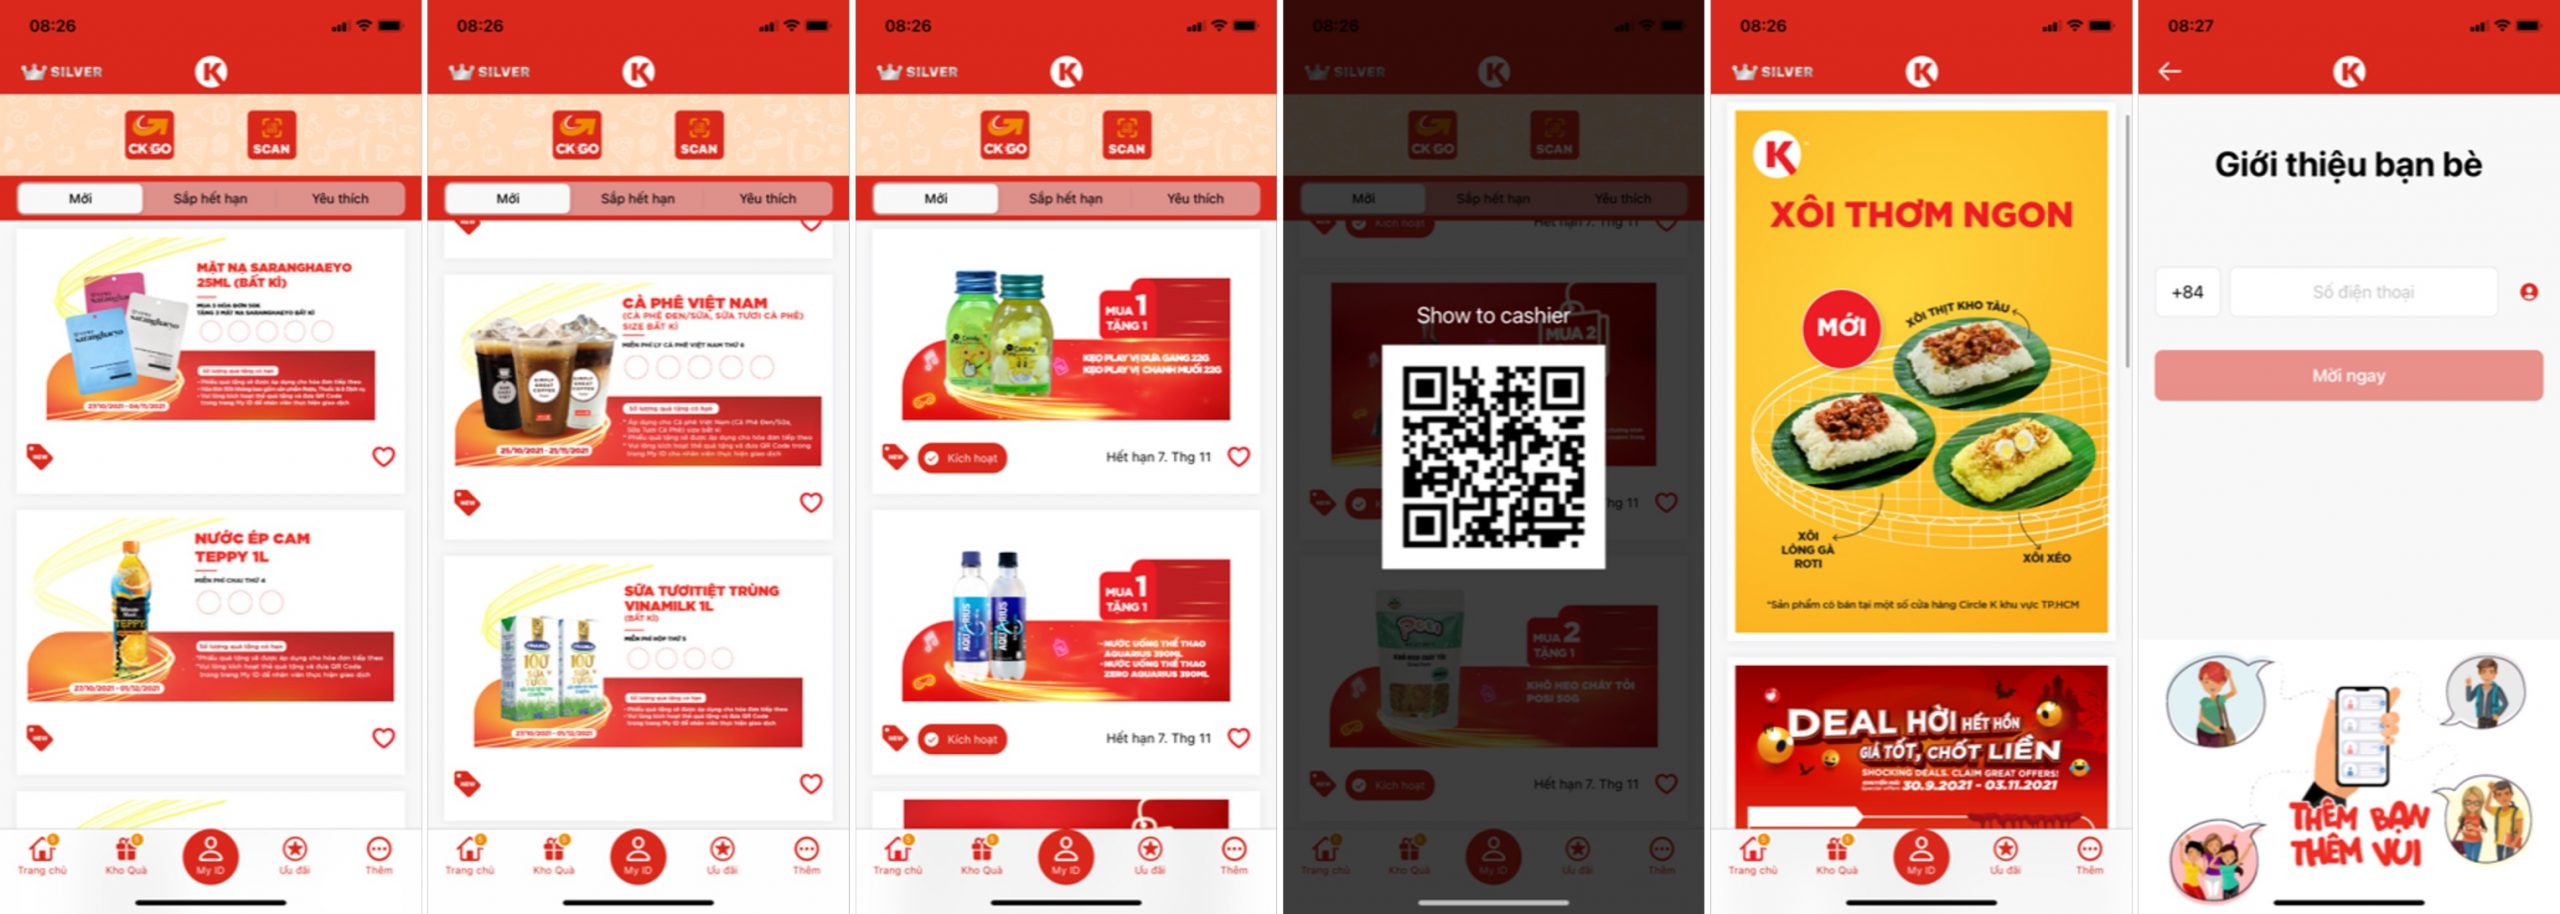 Examples of campaigns within the CK Vietnam customer loyalty program